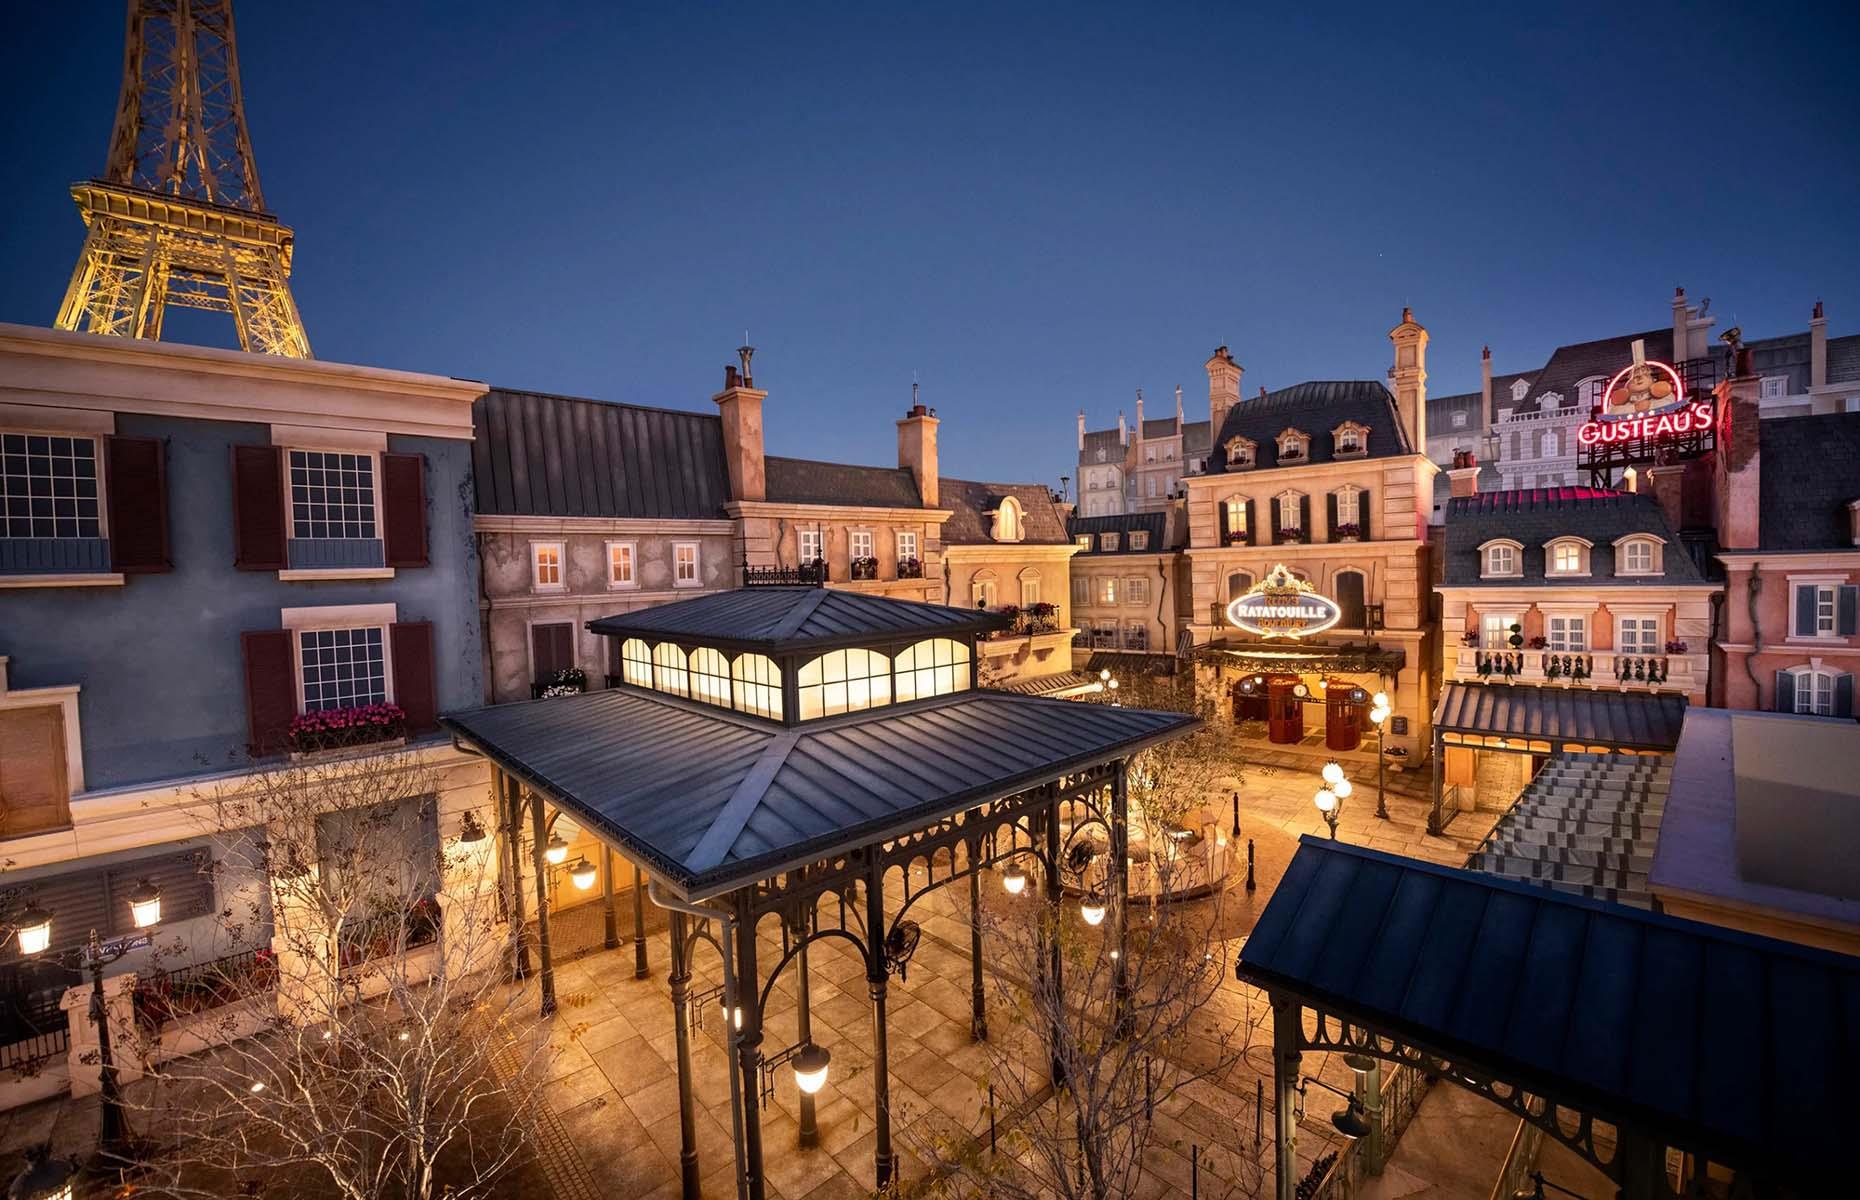 <p>Also coming to EPCOT is a new section of the France pavilion, dedicated to the Disney classic <em>Ratatouille</em>. The pavilion will feature a new attraction, the family-friendly Remy's Ratatouille Adventure that'll make guests feel like they've shrunk to main character Remi's size, and a new restaurant La Crêperie de Paris with sweet crêpes, savory buckwheat galettes and French hard cider all on the menu.</p>  <p><a href="https://www.loveexploring.com/galleries/111534/theme-park-attractions-we-cant-wait-to-try?page=1"><strong>Want more? Discover what's new at America's theme parks</strong></a></p>